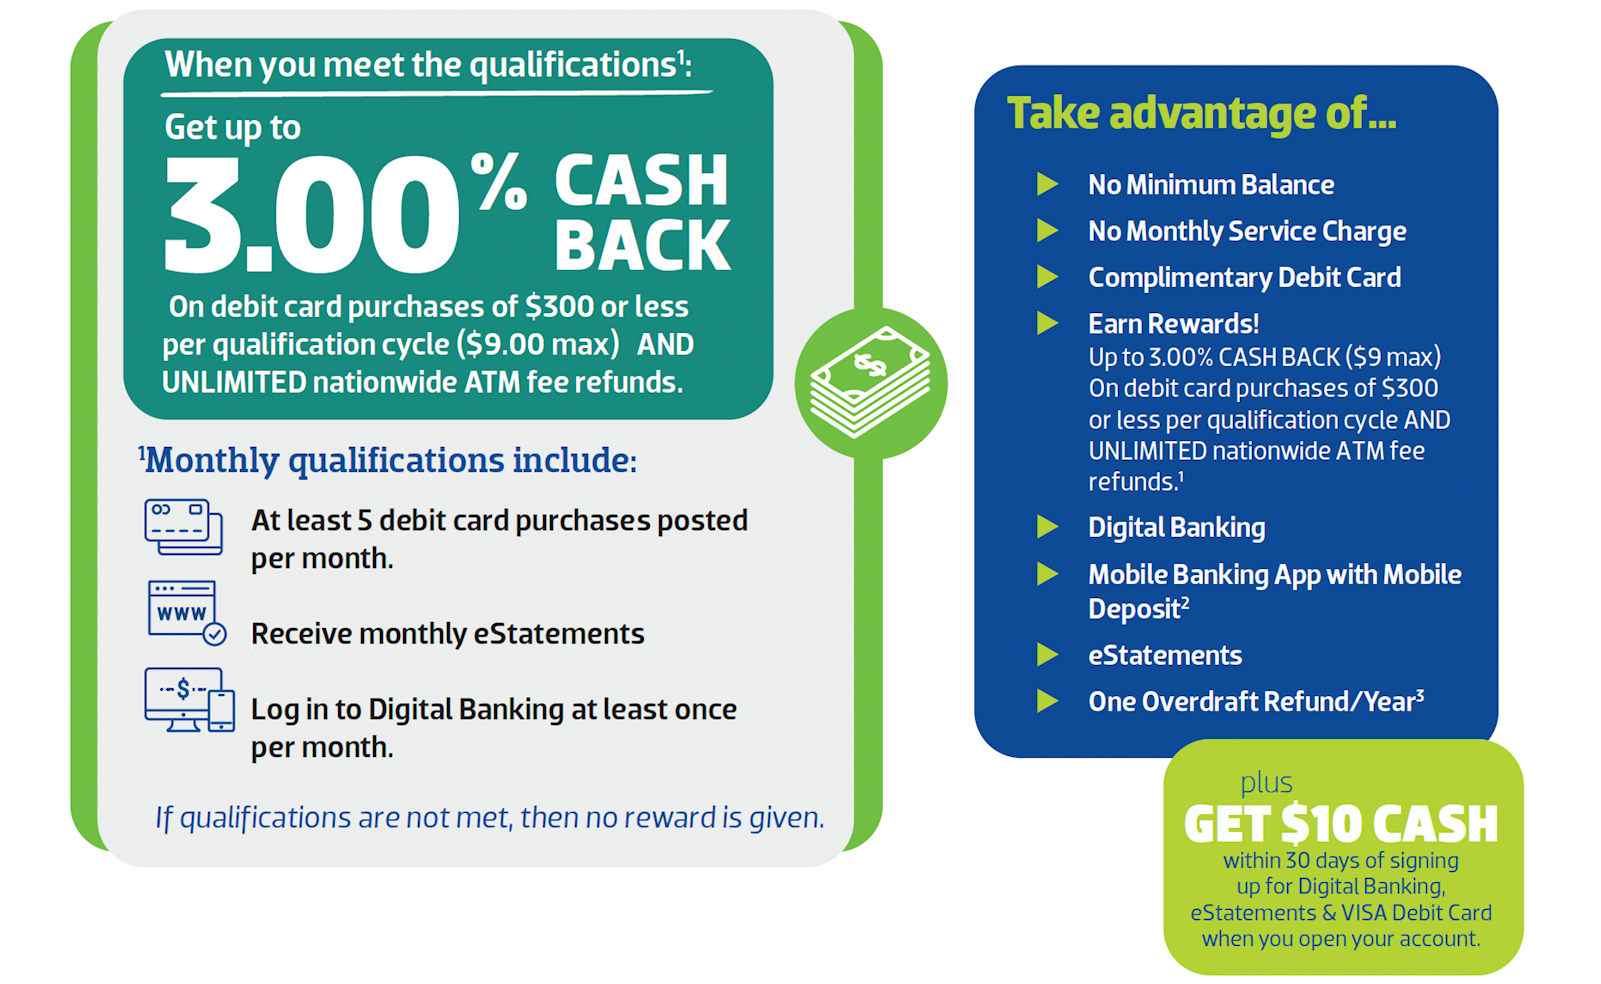 Get up to 3.00% Cash Back on debit card purchases of $300 or less per qualification cycle ($9.00 max) AND unlimited nationwide ATM fee refunds.